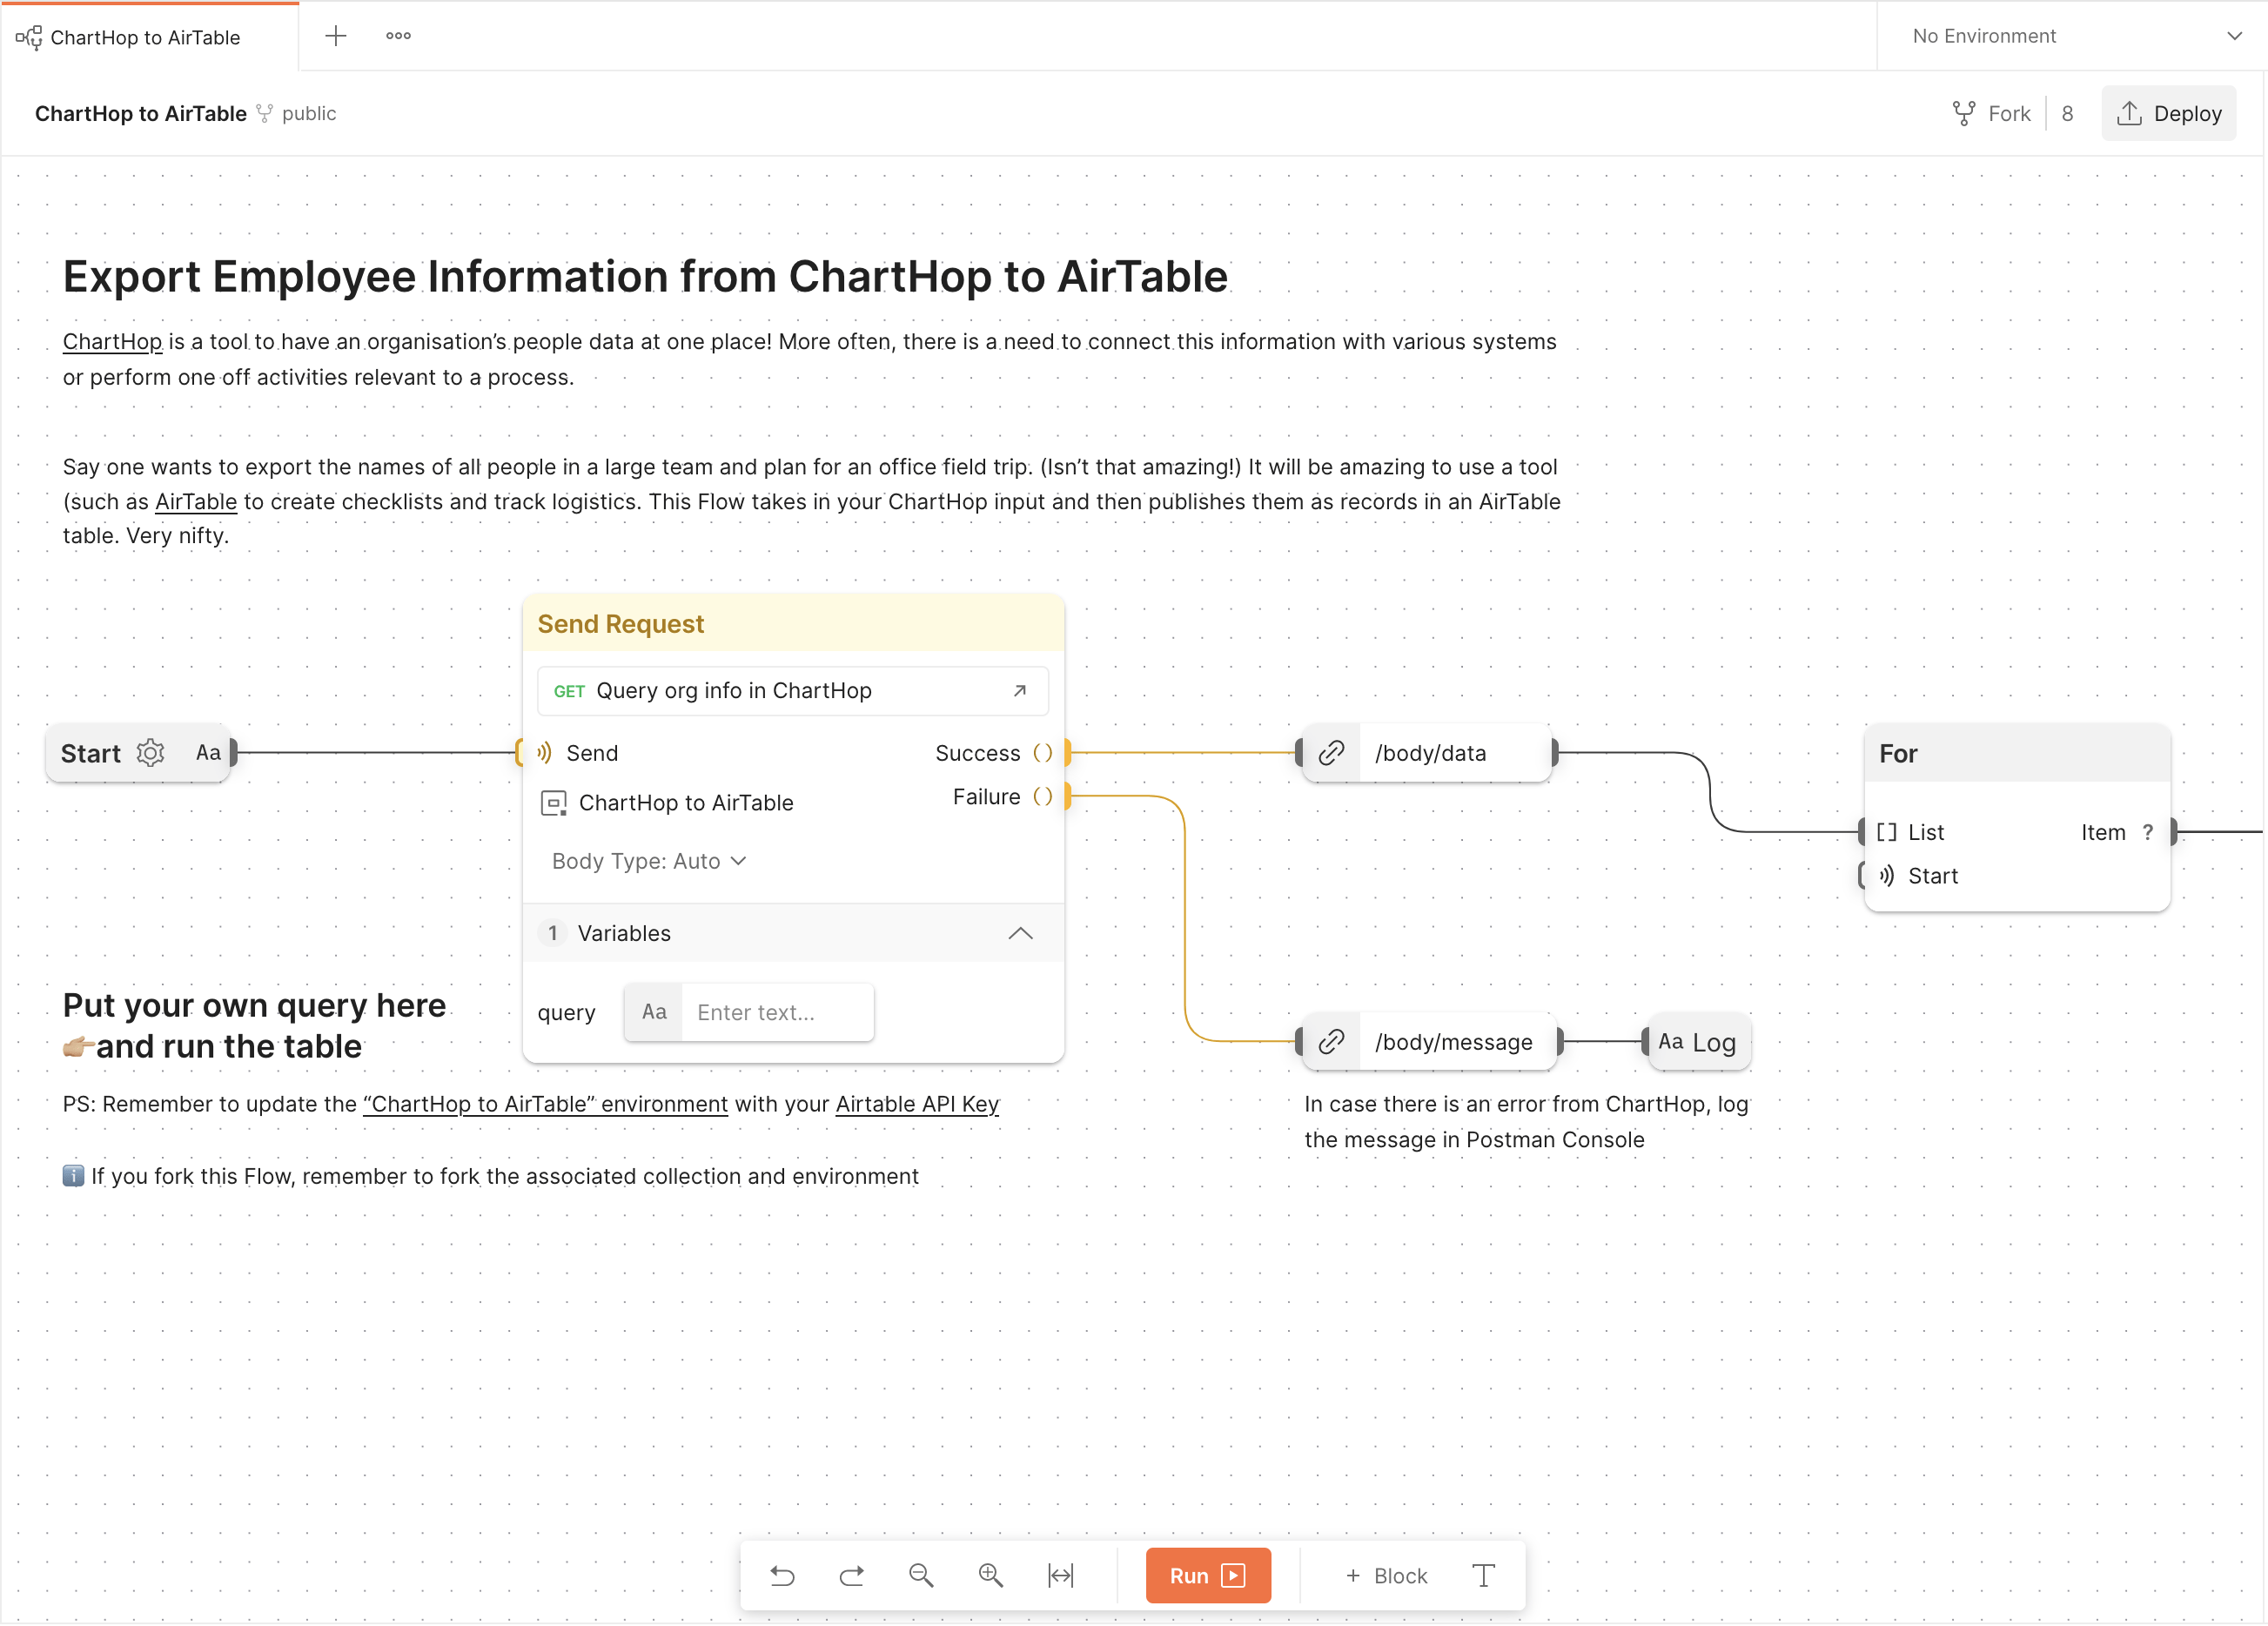 Postman Flow used to export employee information from ChartHop to AirTable